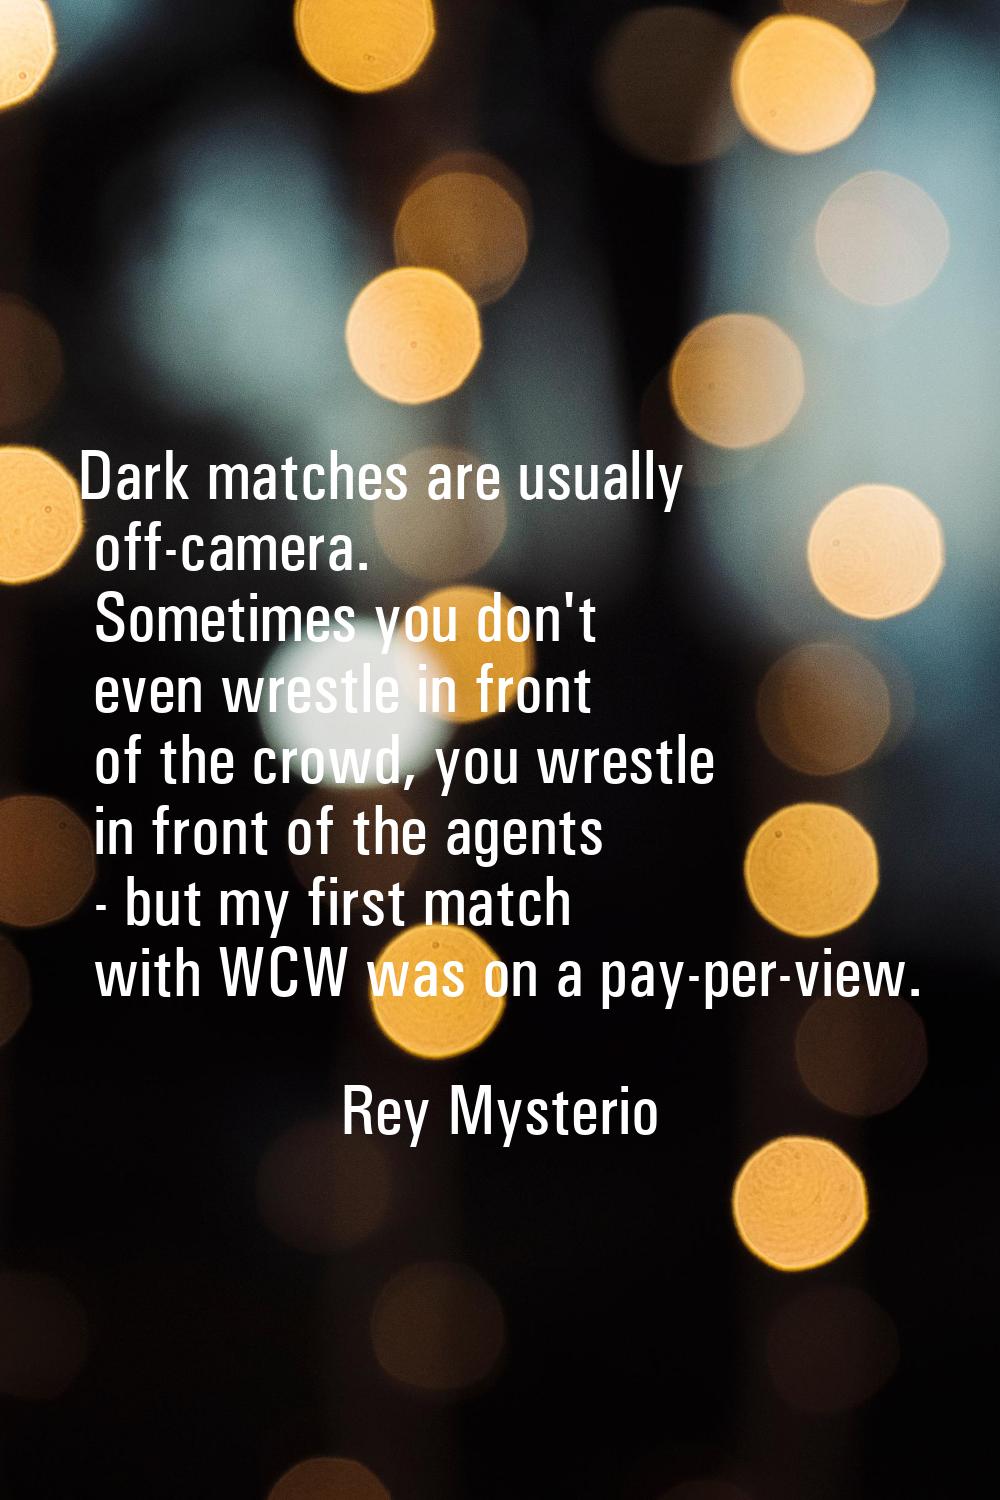 Dark matches are usually off-camera. Sometimes you don't even wrestle in front of the crowd, you wr